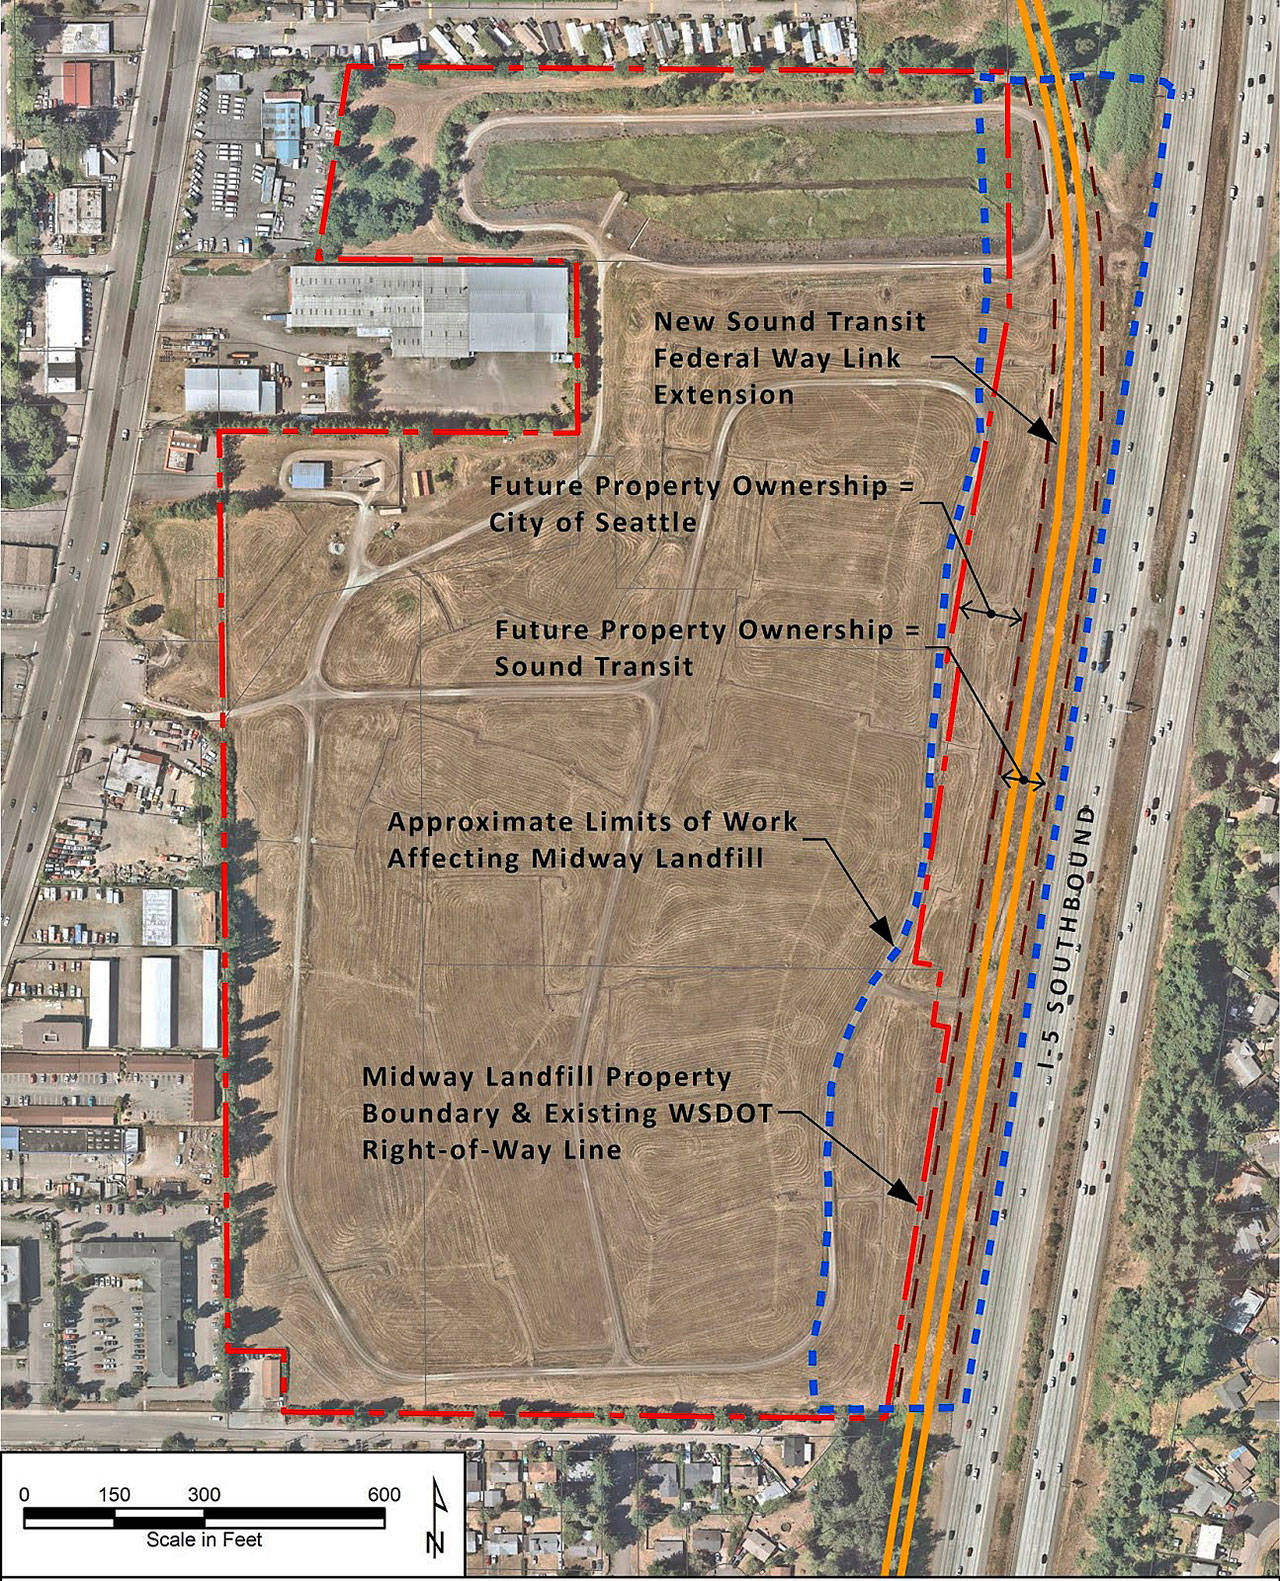 A map shows the former Midway Landfill in the center, with the I-5 freeway just to the right. A double yellow line shows the future path of light rail along the freeway at the landfill’s edge. A red line shows the landfill boundaries. A blue line shows the work area for light rail construction. Crews will close part of I-5 southbound May 18-21 for access road work. COURTESY GRAPHIC, State Ecology